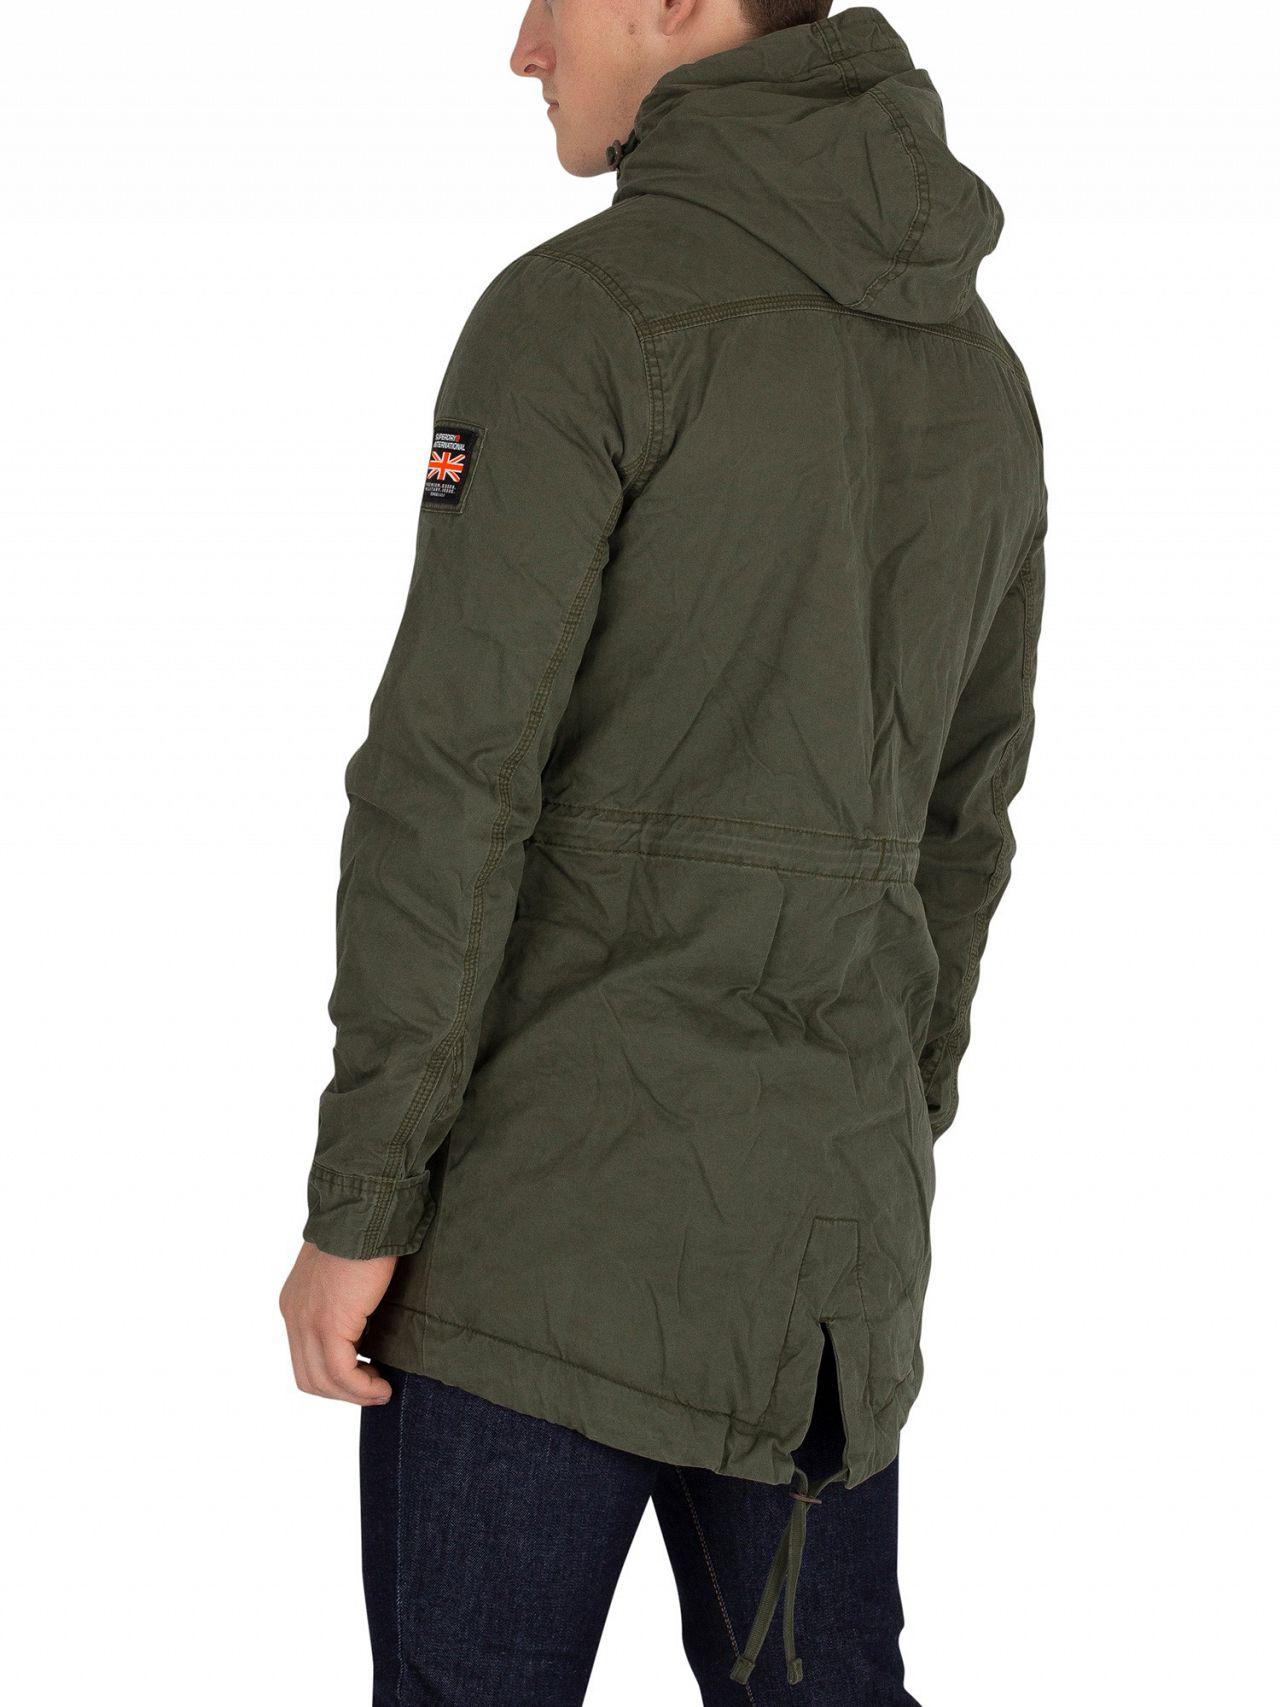 Superdry Cotton Forest Night New Military Parka Jacket in Green for Men -  Lyst